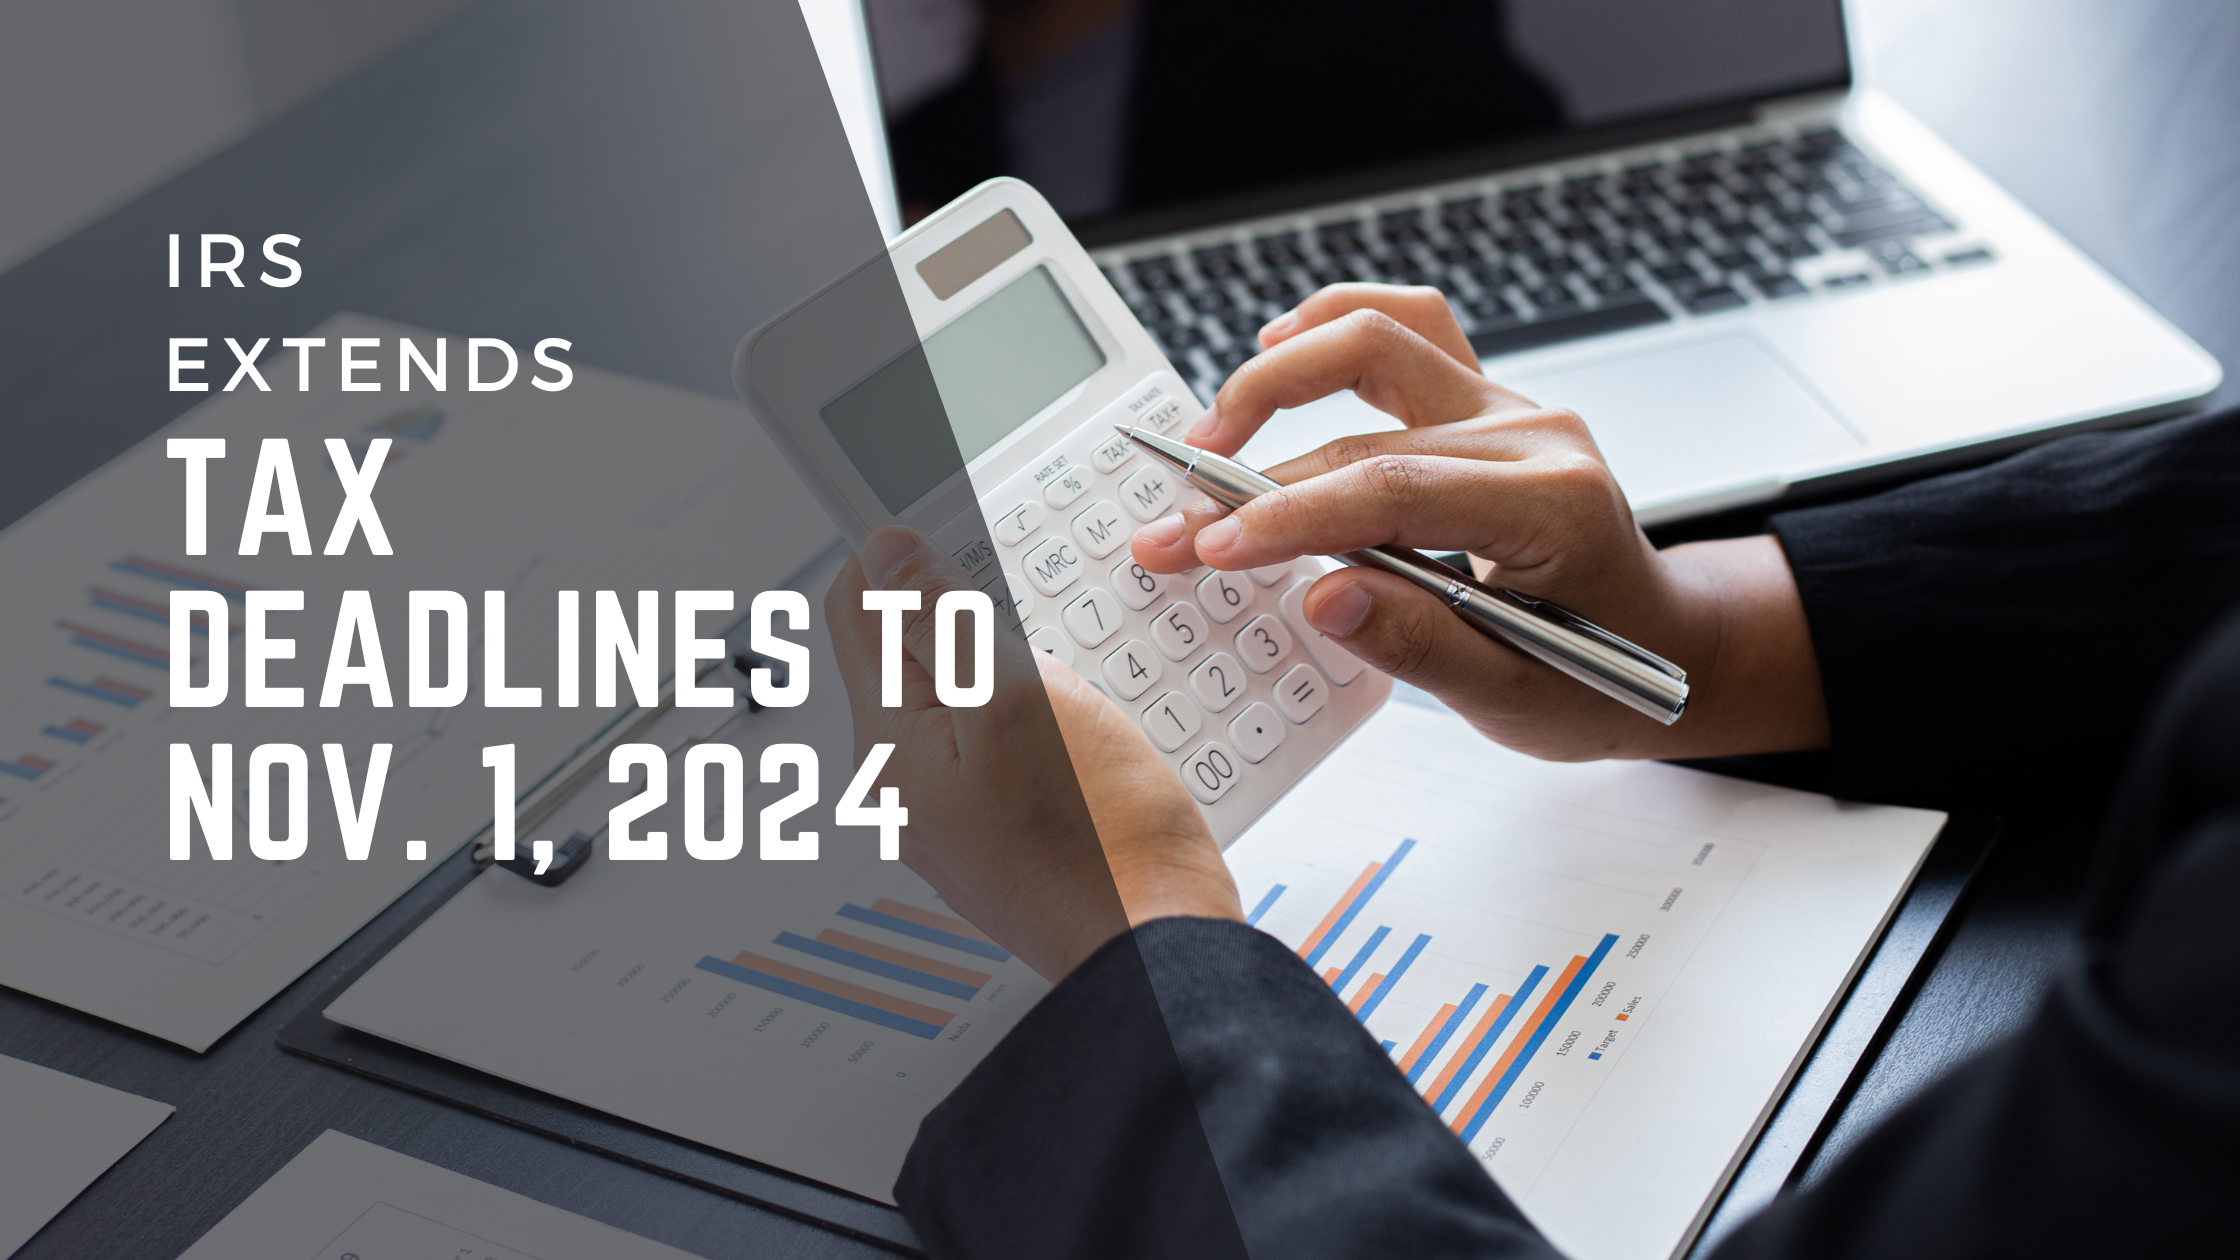 IRS Extends Tax Deadlines to Nov. 1, 2024